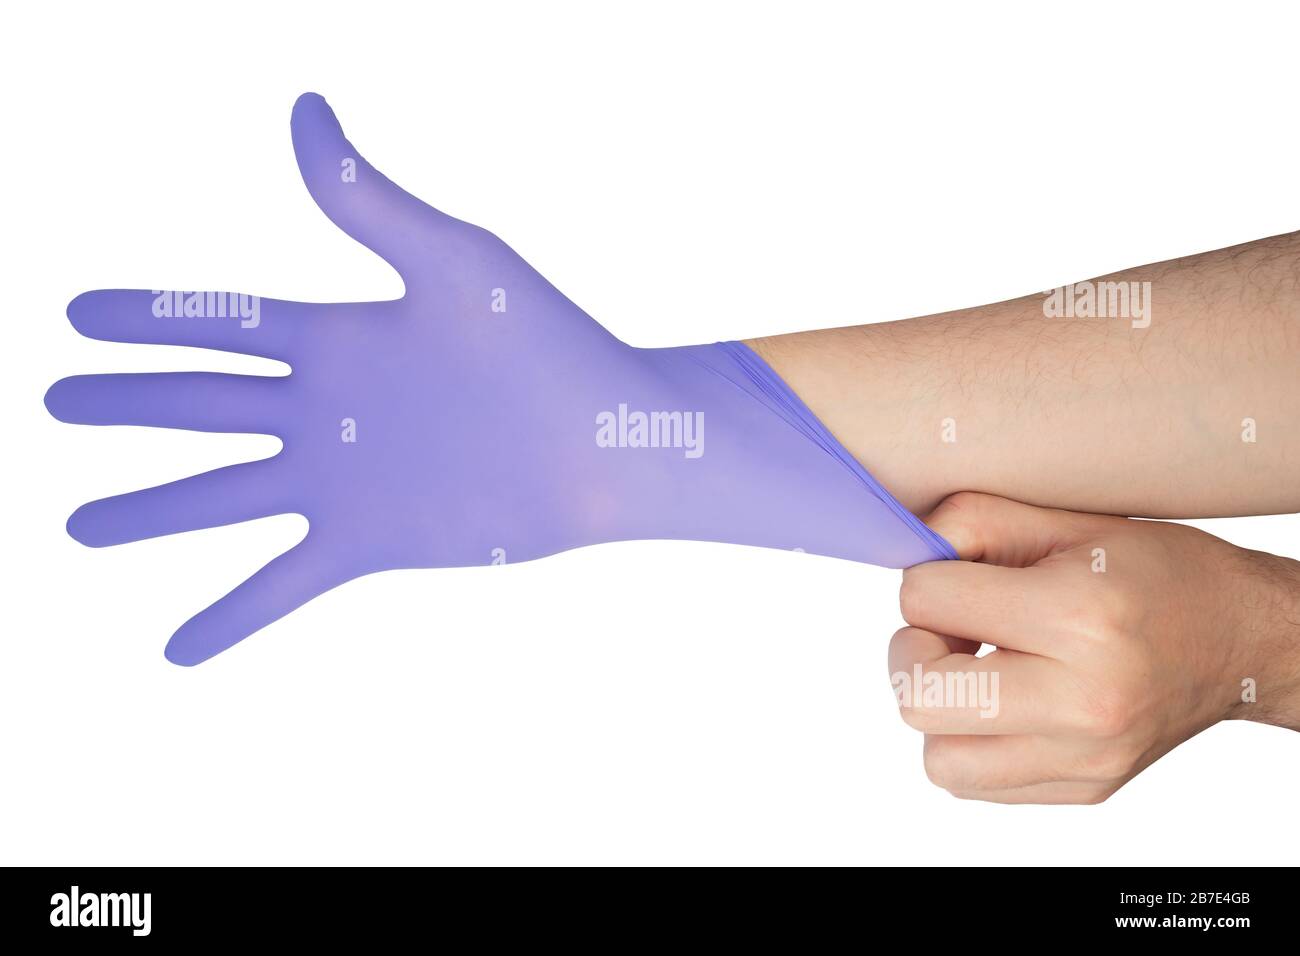 Hands wearing a blue latex glove isolated on white background Stock Photo